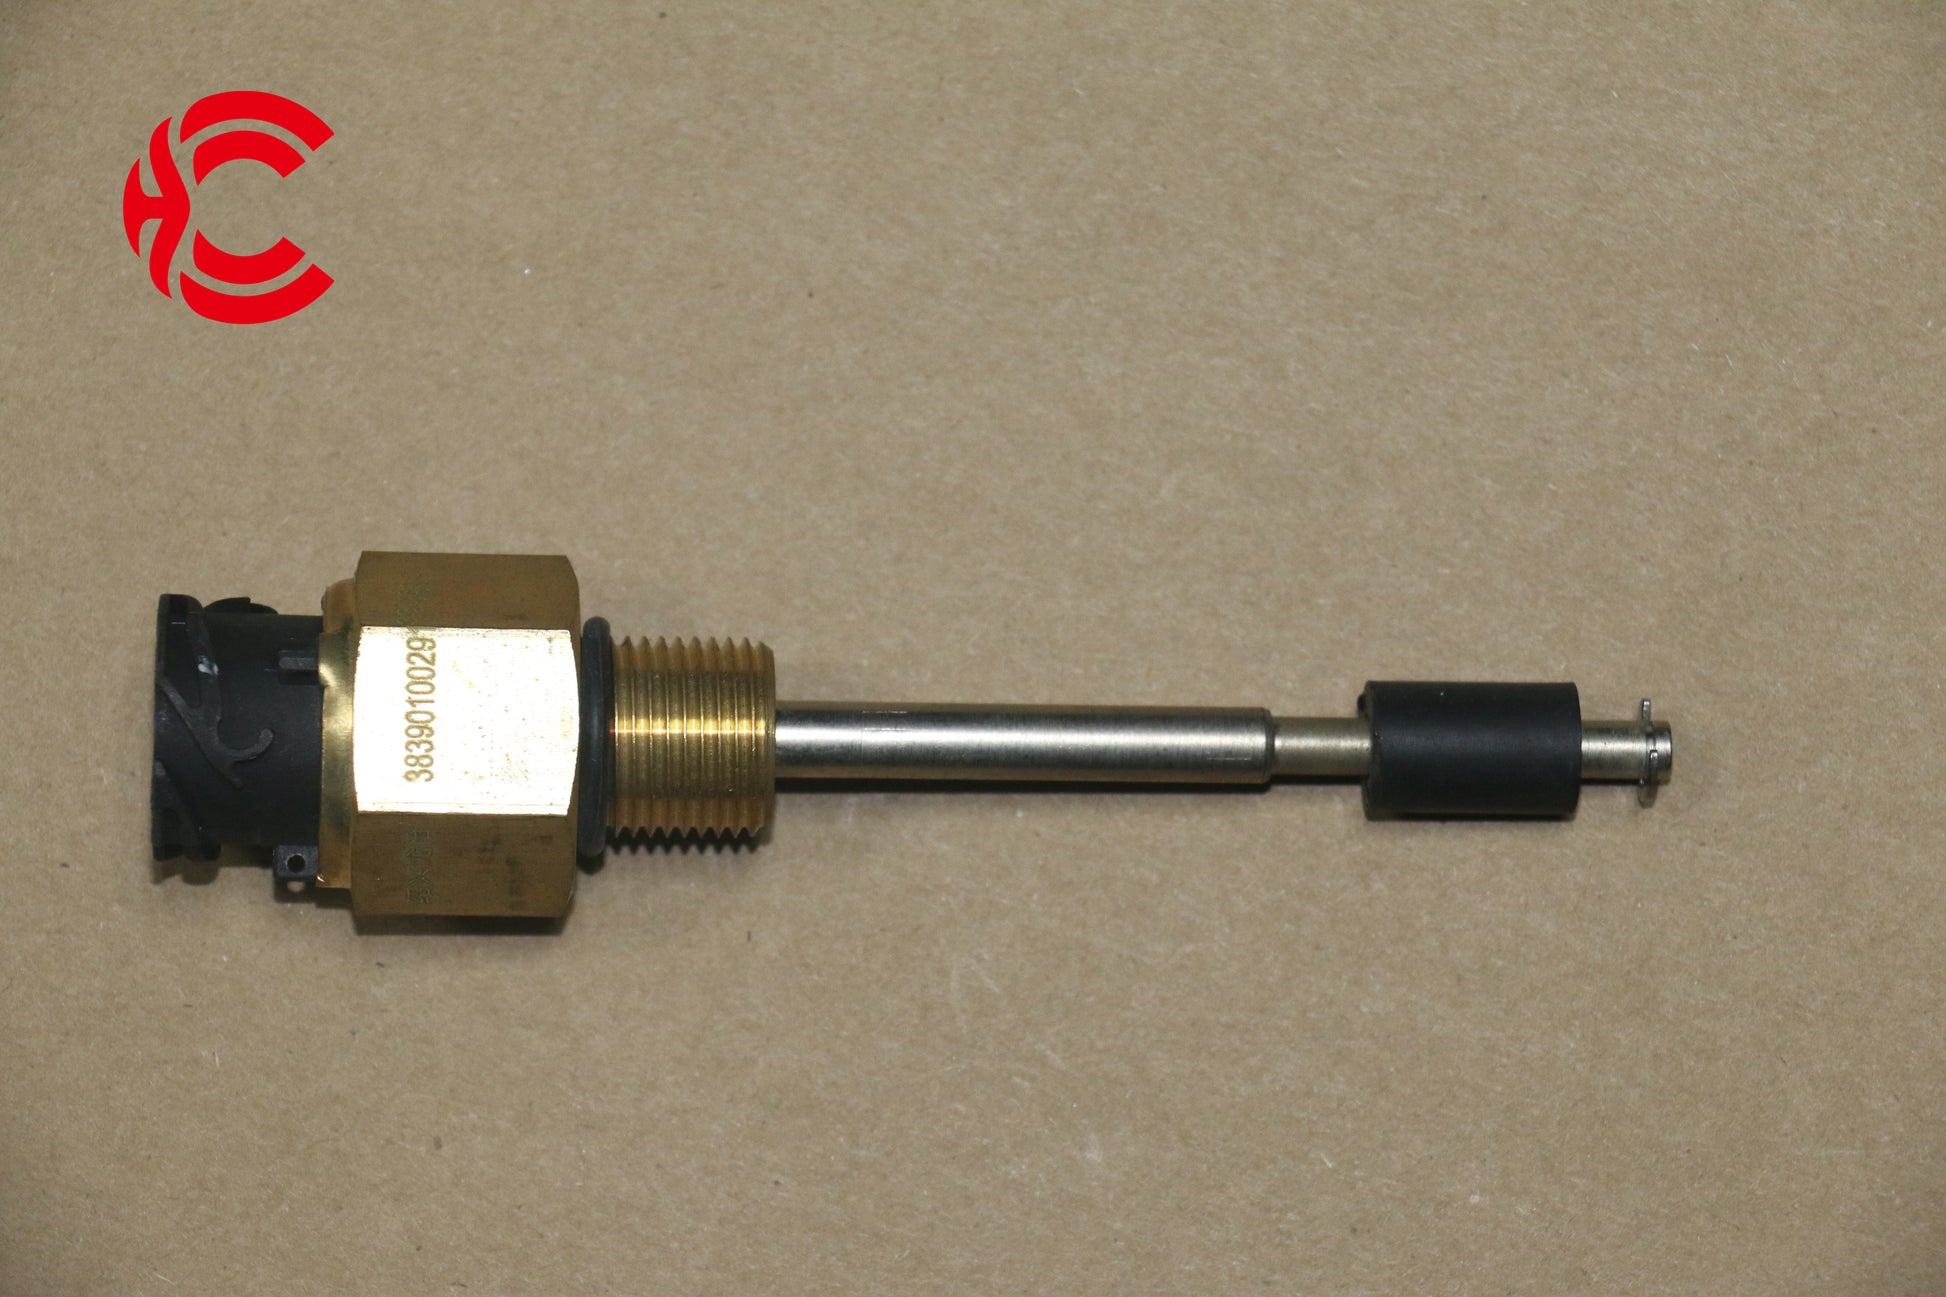 OEM: SB903 DONGFENGMaterial: ABSColor: BlackOrigin: Made in ChinaWeight: 50gPacking List: 1* Coolant Level Alarm Sensor More ServiceWe can provide OEM Manufacturing serviceWe can Be your one-step solution for Auto PartsWe can provide technical scheme for you Feel Free to Contact Us, We will get back to you as soon as possible.